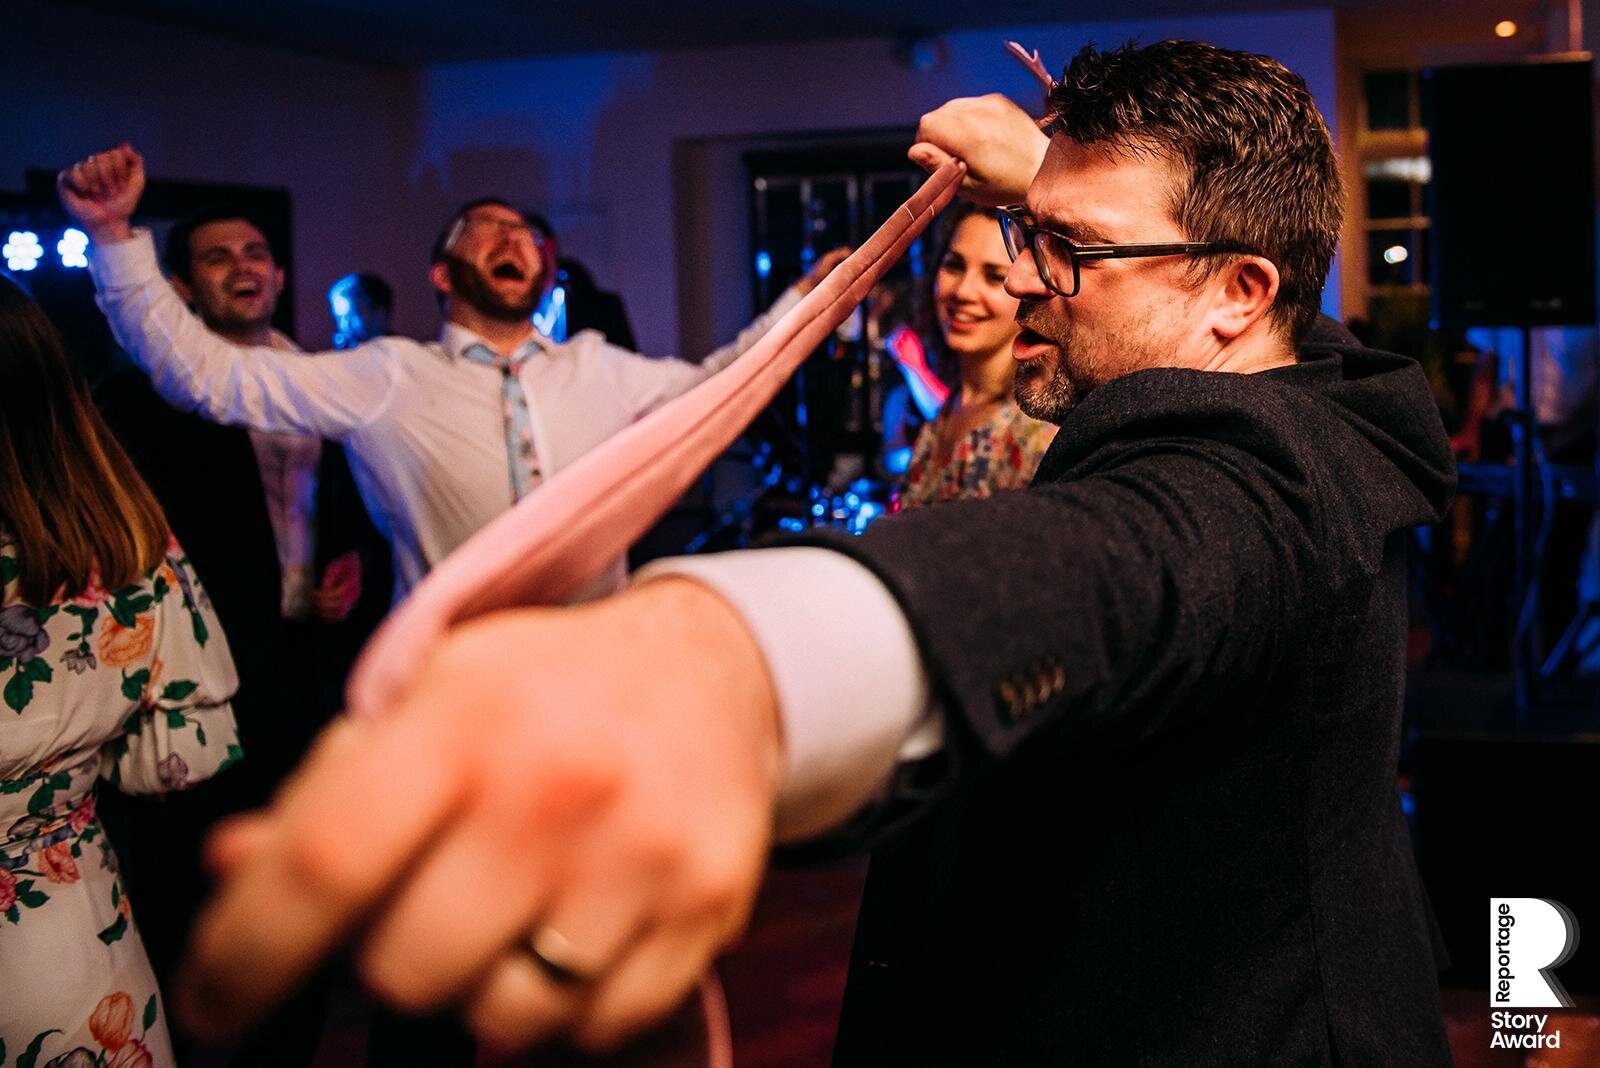  Man plays with tie while another cheers on the dance floor. 